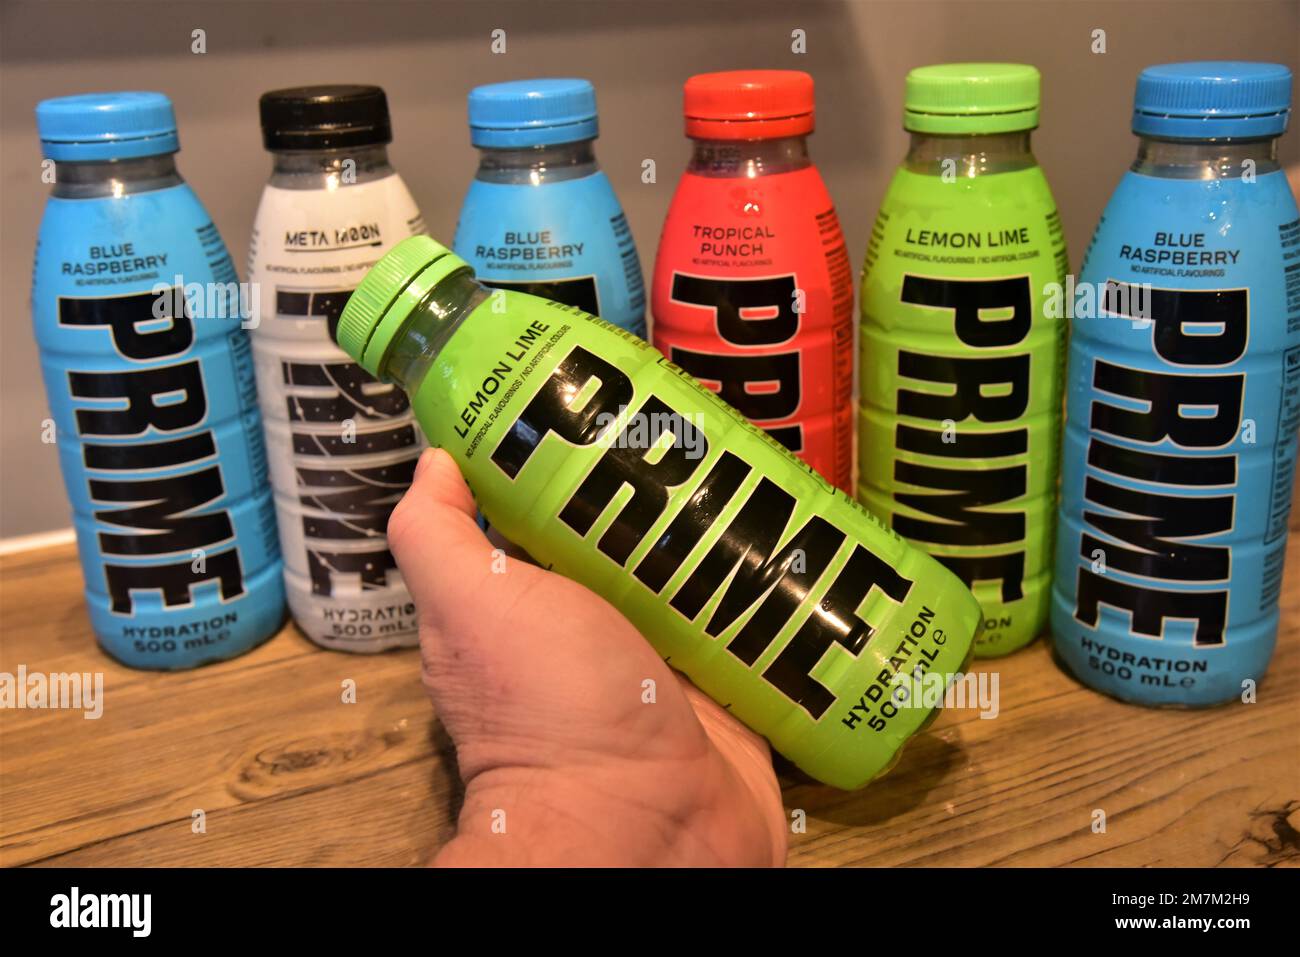 PRIME hydration soft drink by YouTube stars KSI and Logan Paul. The must have drink by teenagers is sold out within minutes after appearing on shelves Stock Photo